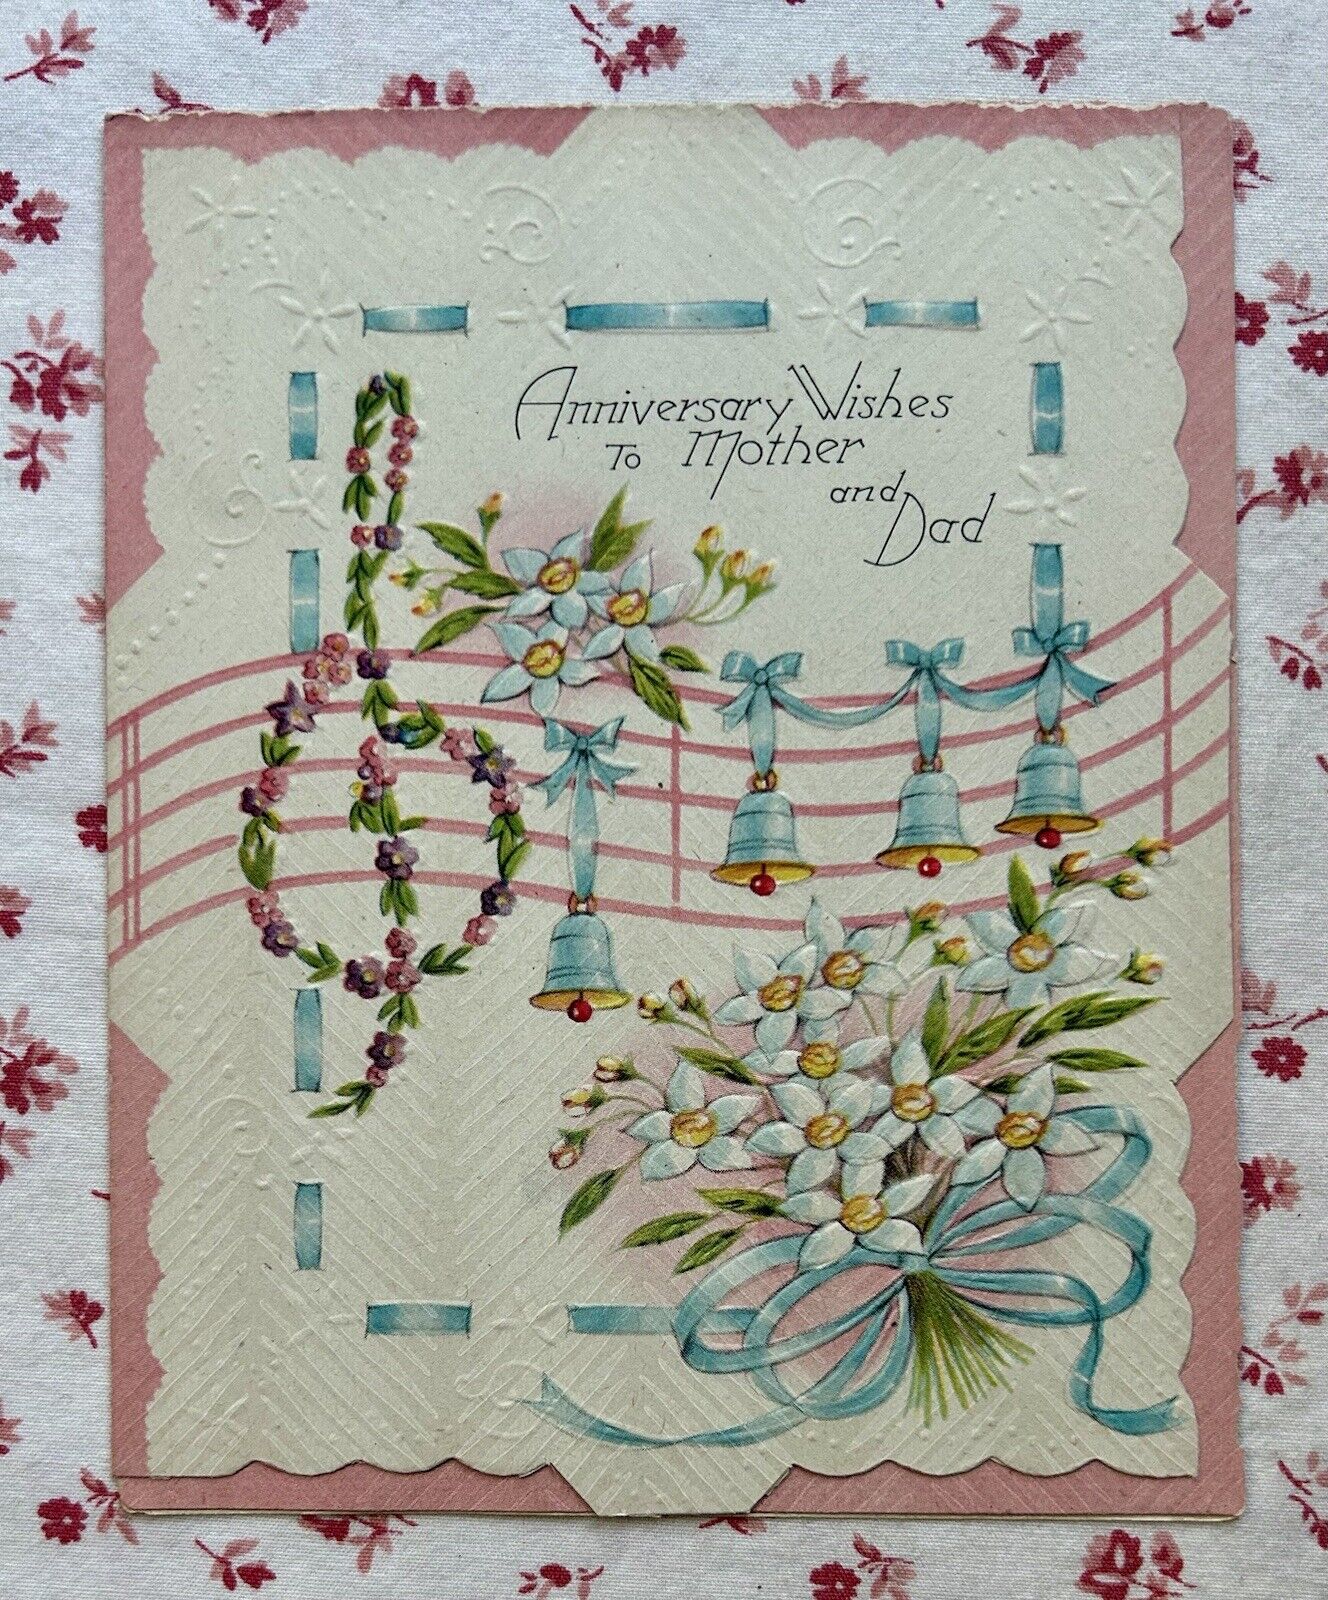 Vintage 1940s UNUSED Anniversary Wishes for Mother & Dad Treble Clef Card